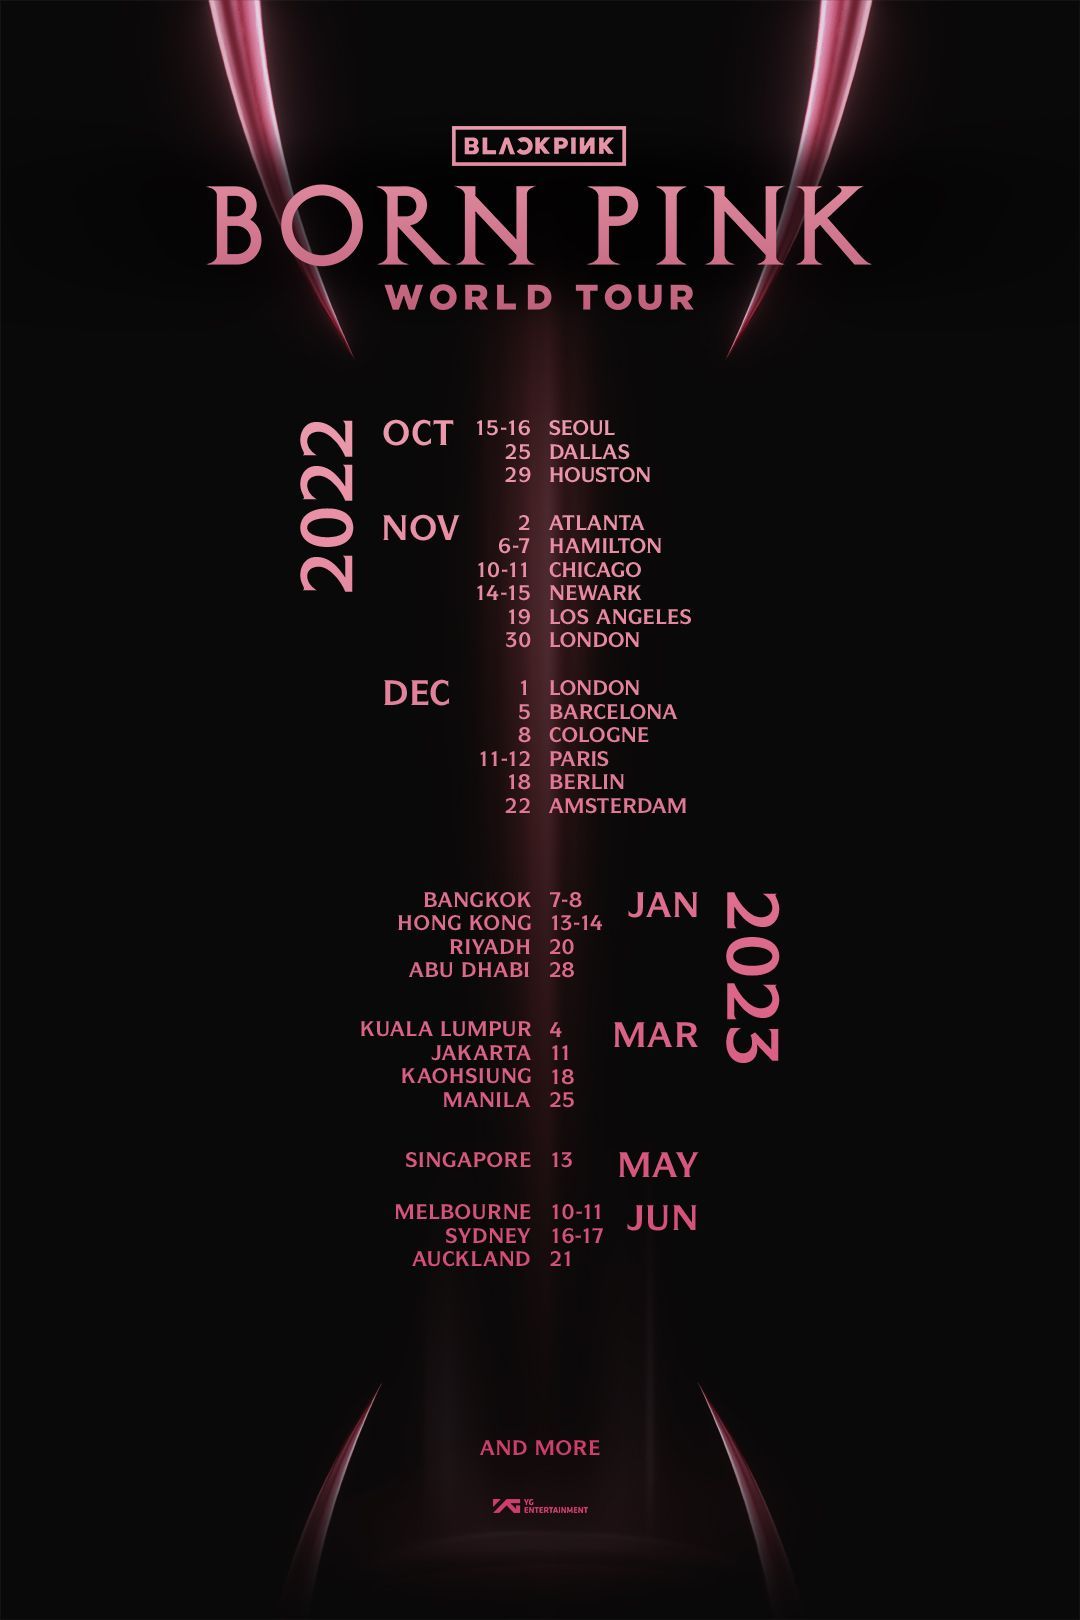 Blackpink to embark on world tour with 'Born Pink' in Seoul in Oct